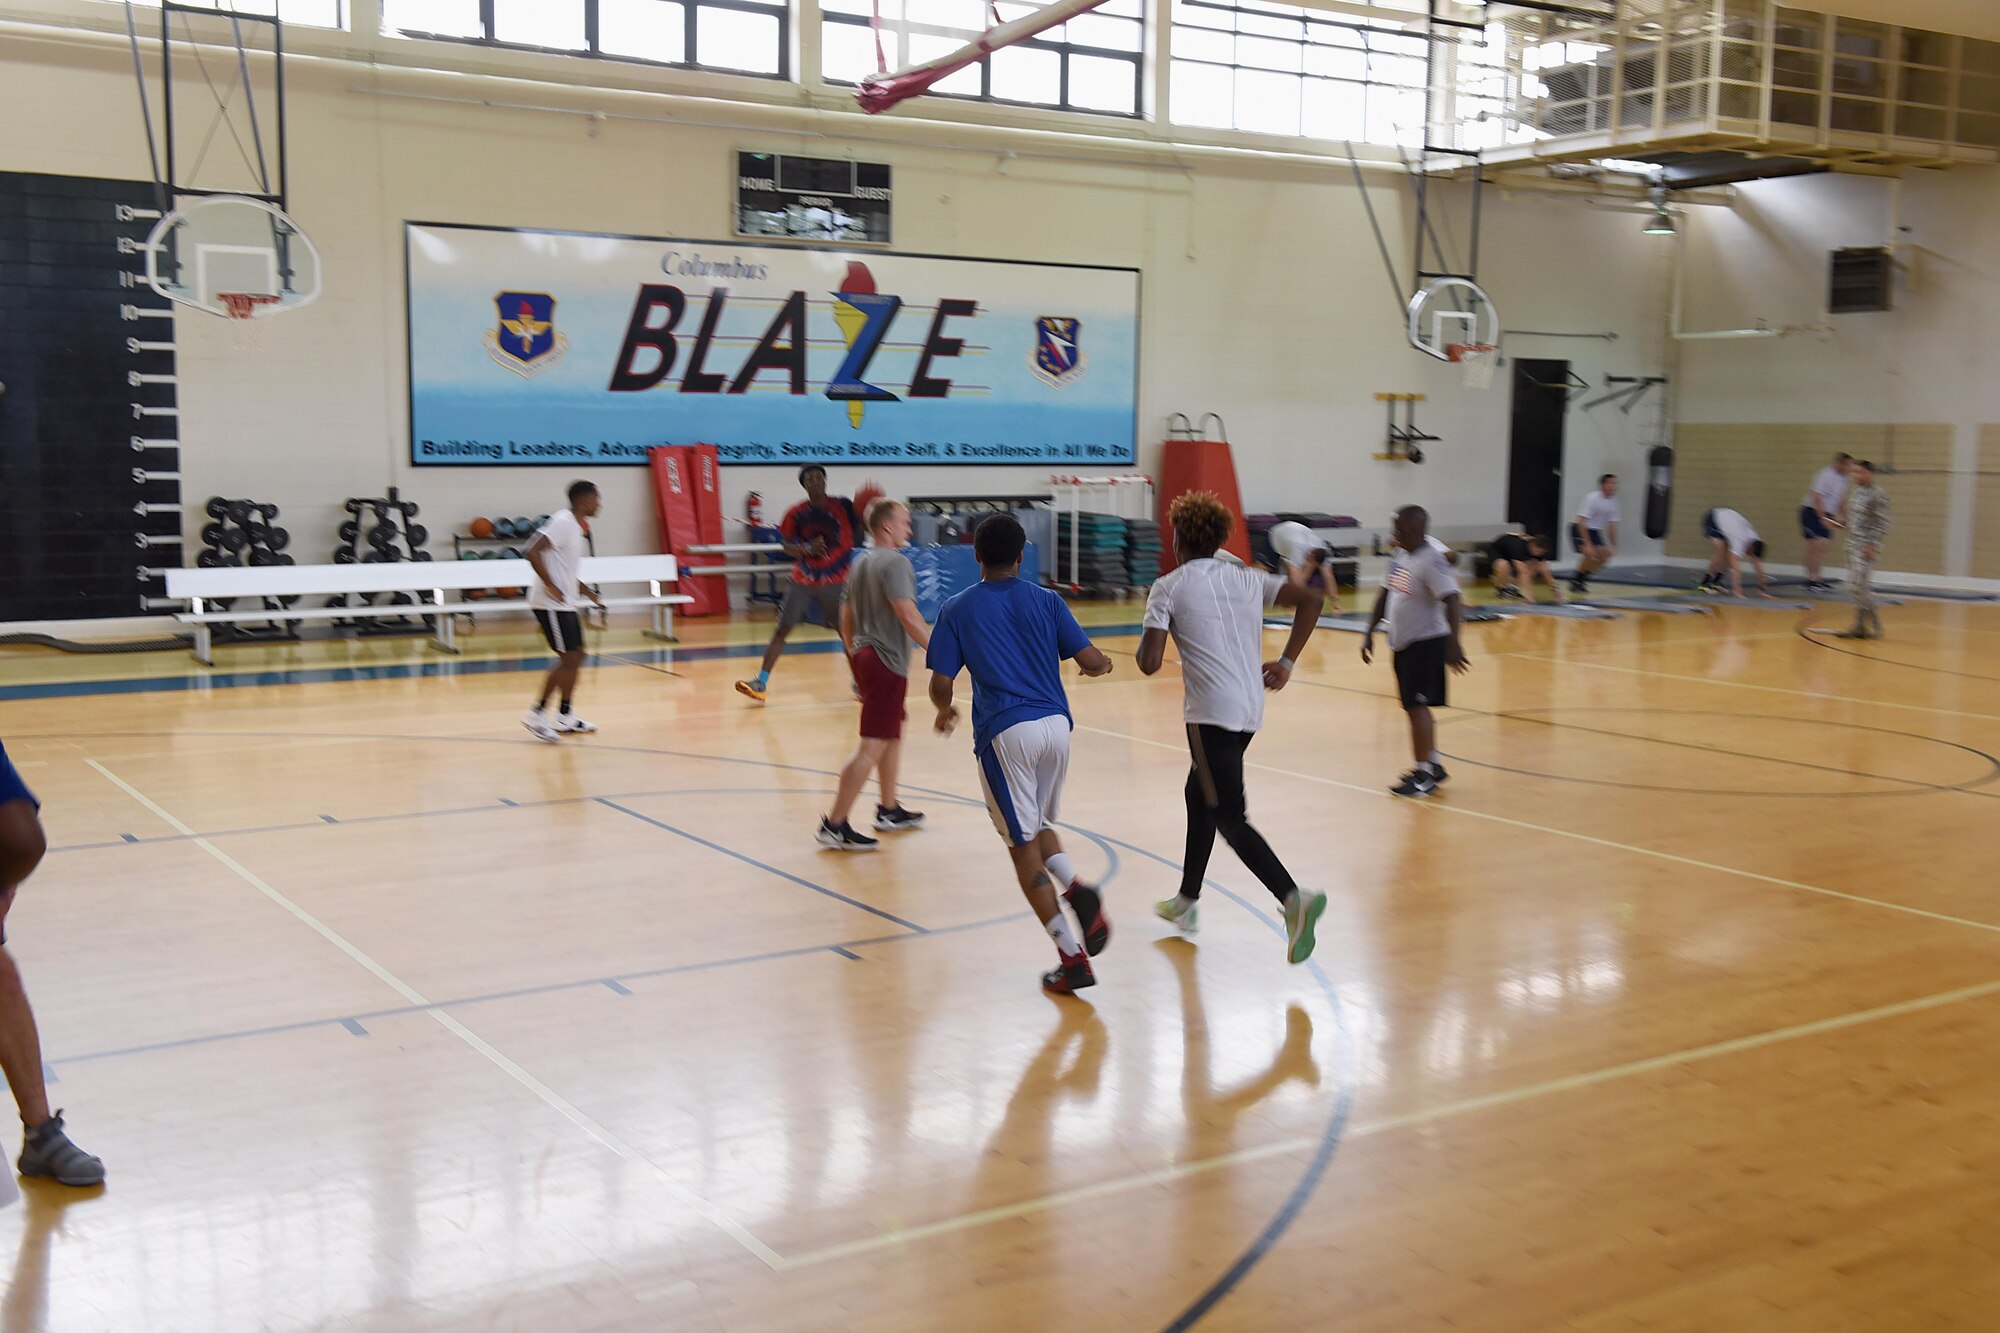 Team BLAZE members play basketball and workout in the Fitness Center June 19, 2018, on Columbus Air Force Base, Mississippi. The 14th Force Support Squadron keeps the quality-of-life for Airmen and their families high so together they can produce pilots, advance Airmen and feed the fight. (U.S. Air Force photo by Airman 1st Class Keith Holcomb)